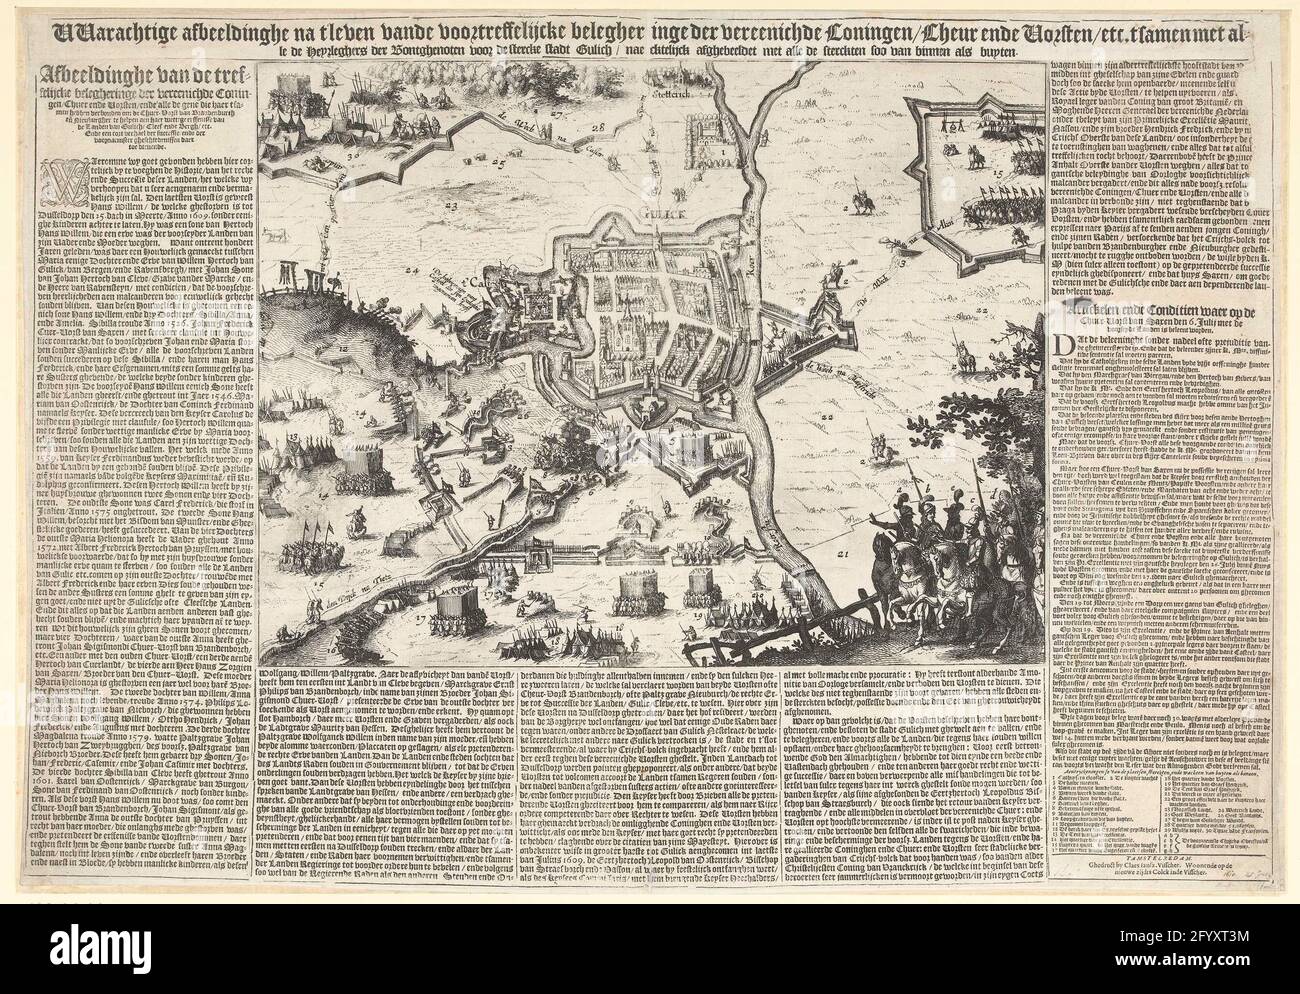 Siege from Gulik, 1610; Warly figure after t'leven Vandeffelijcke Besternele of the Principles / Cheering and Prince / etc. Tsamen with all the Heyrleghers of Bonthenots for the Stercke Stadt Gulich / Naecktelijck AfghePept set with all the STERCKTEN SOO inside like buyten. Siege Van Gulik, July 1610. Plan of the city of Gulik and the surrounding country with the army camps of the segregating troops of Prince Maurits and the other allies of the Keurvorst van Brandenburg. In the foreground the army leaders on horseback. With a description of the events and legendas 1-30 and A-H in letterpress i Stock Photo